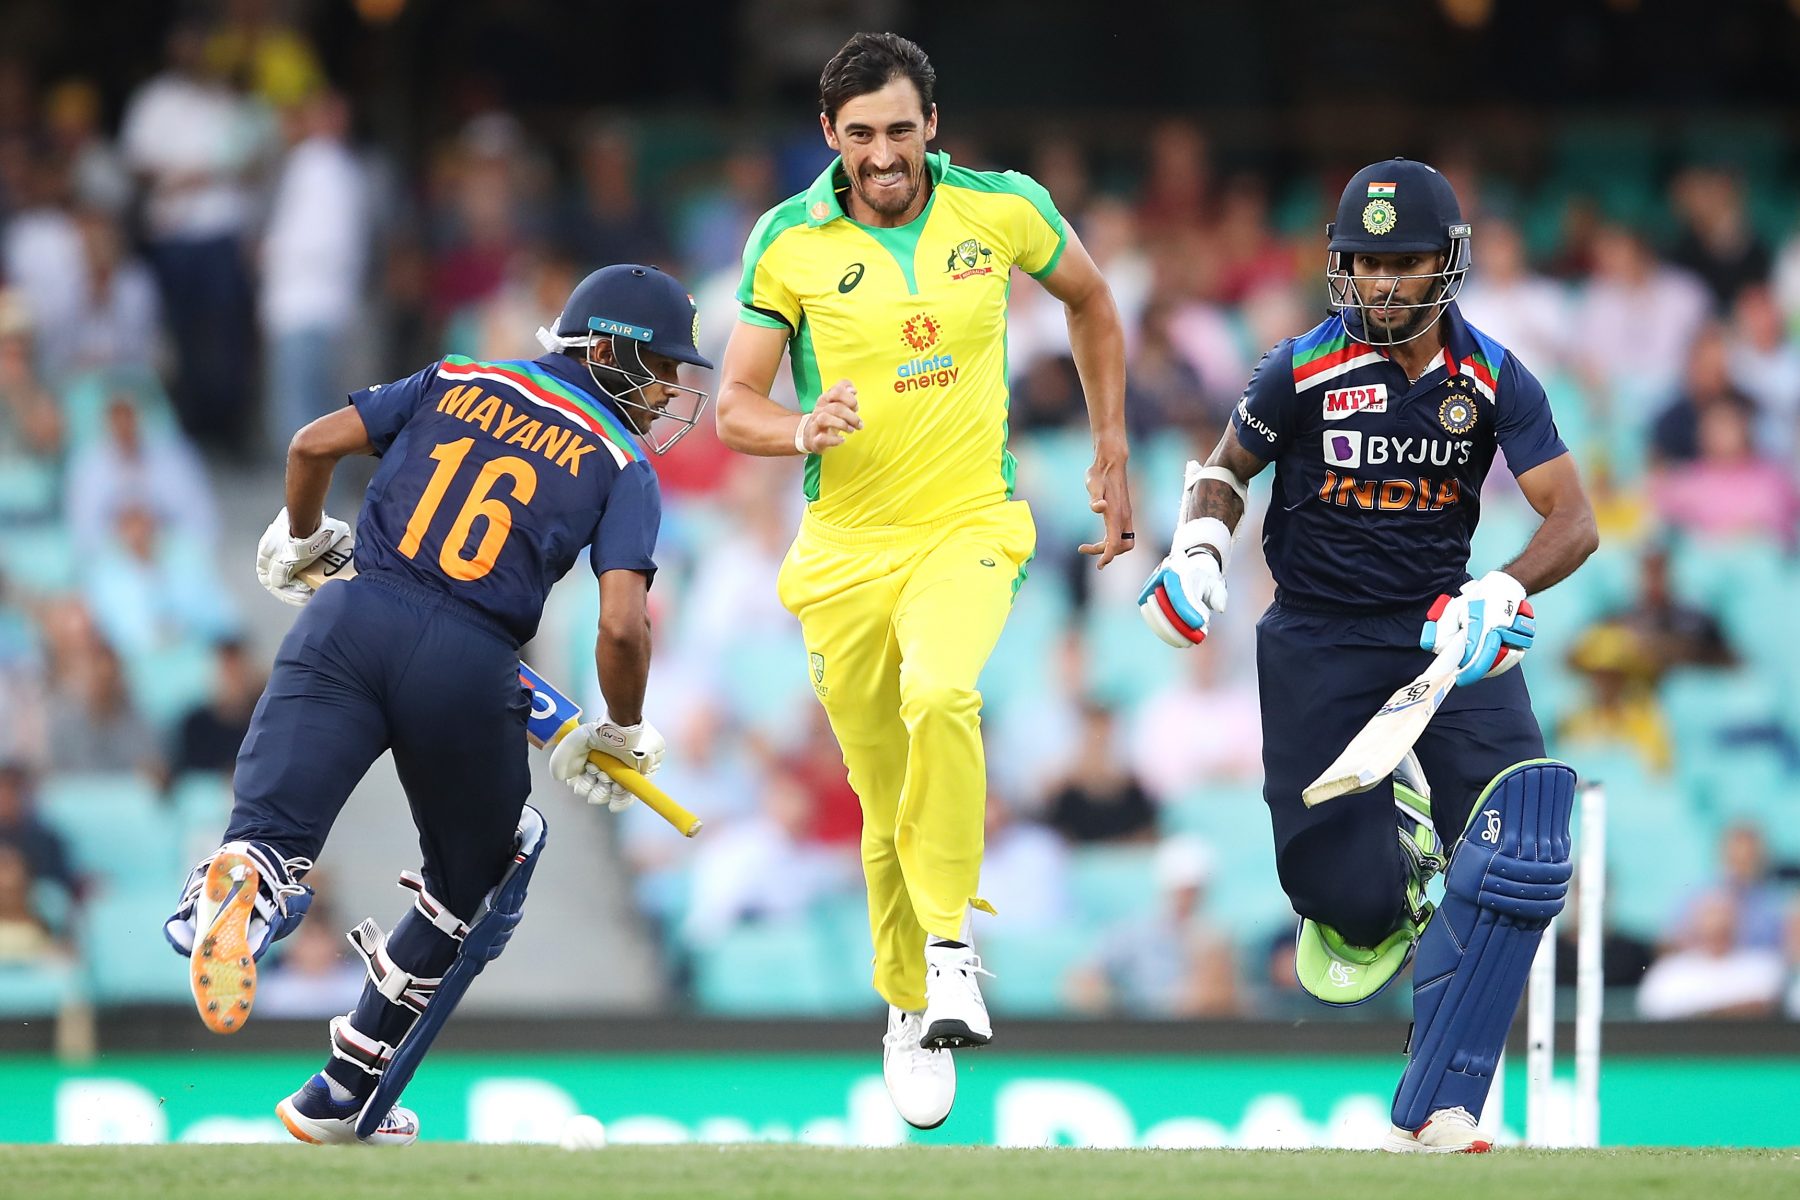 Australia has shown outstanding performance in the first ODI: Vaughan